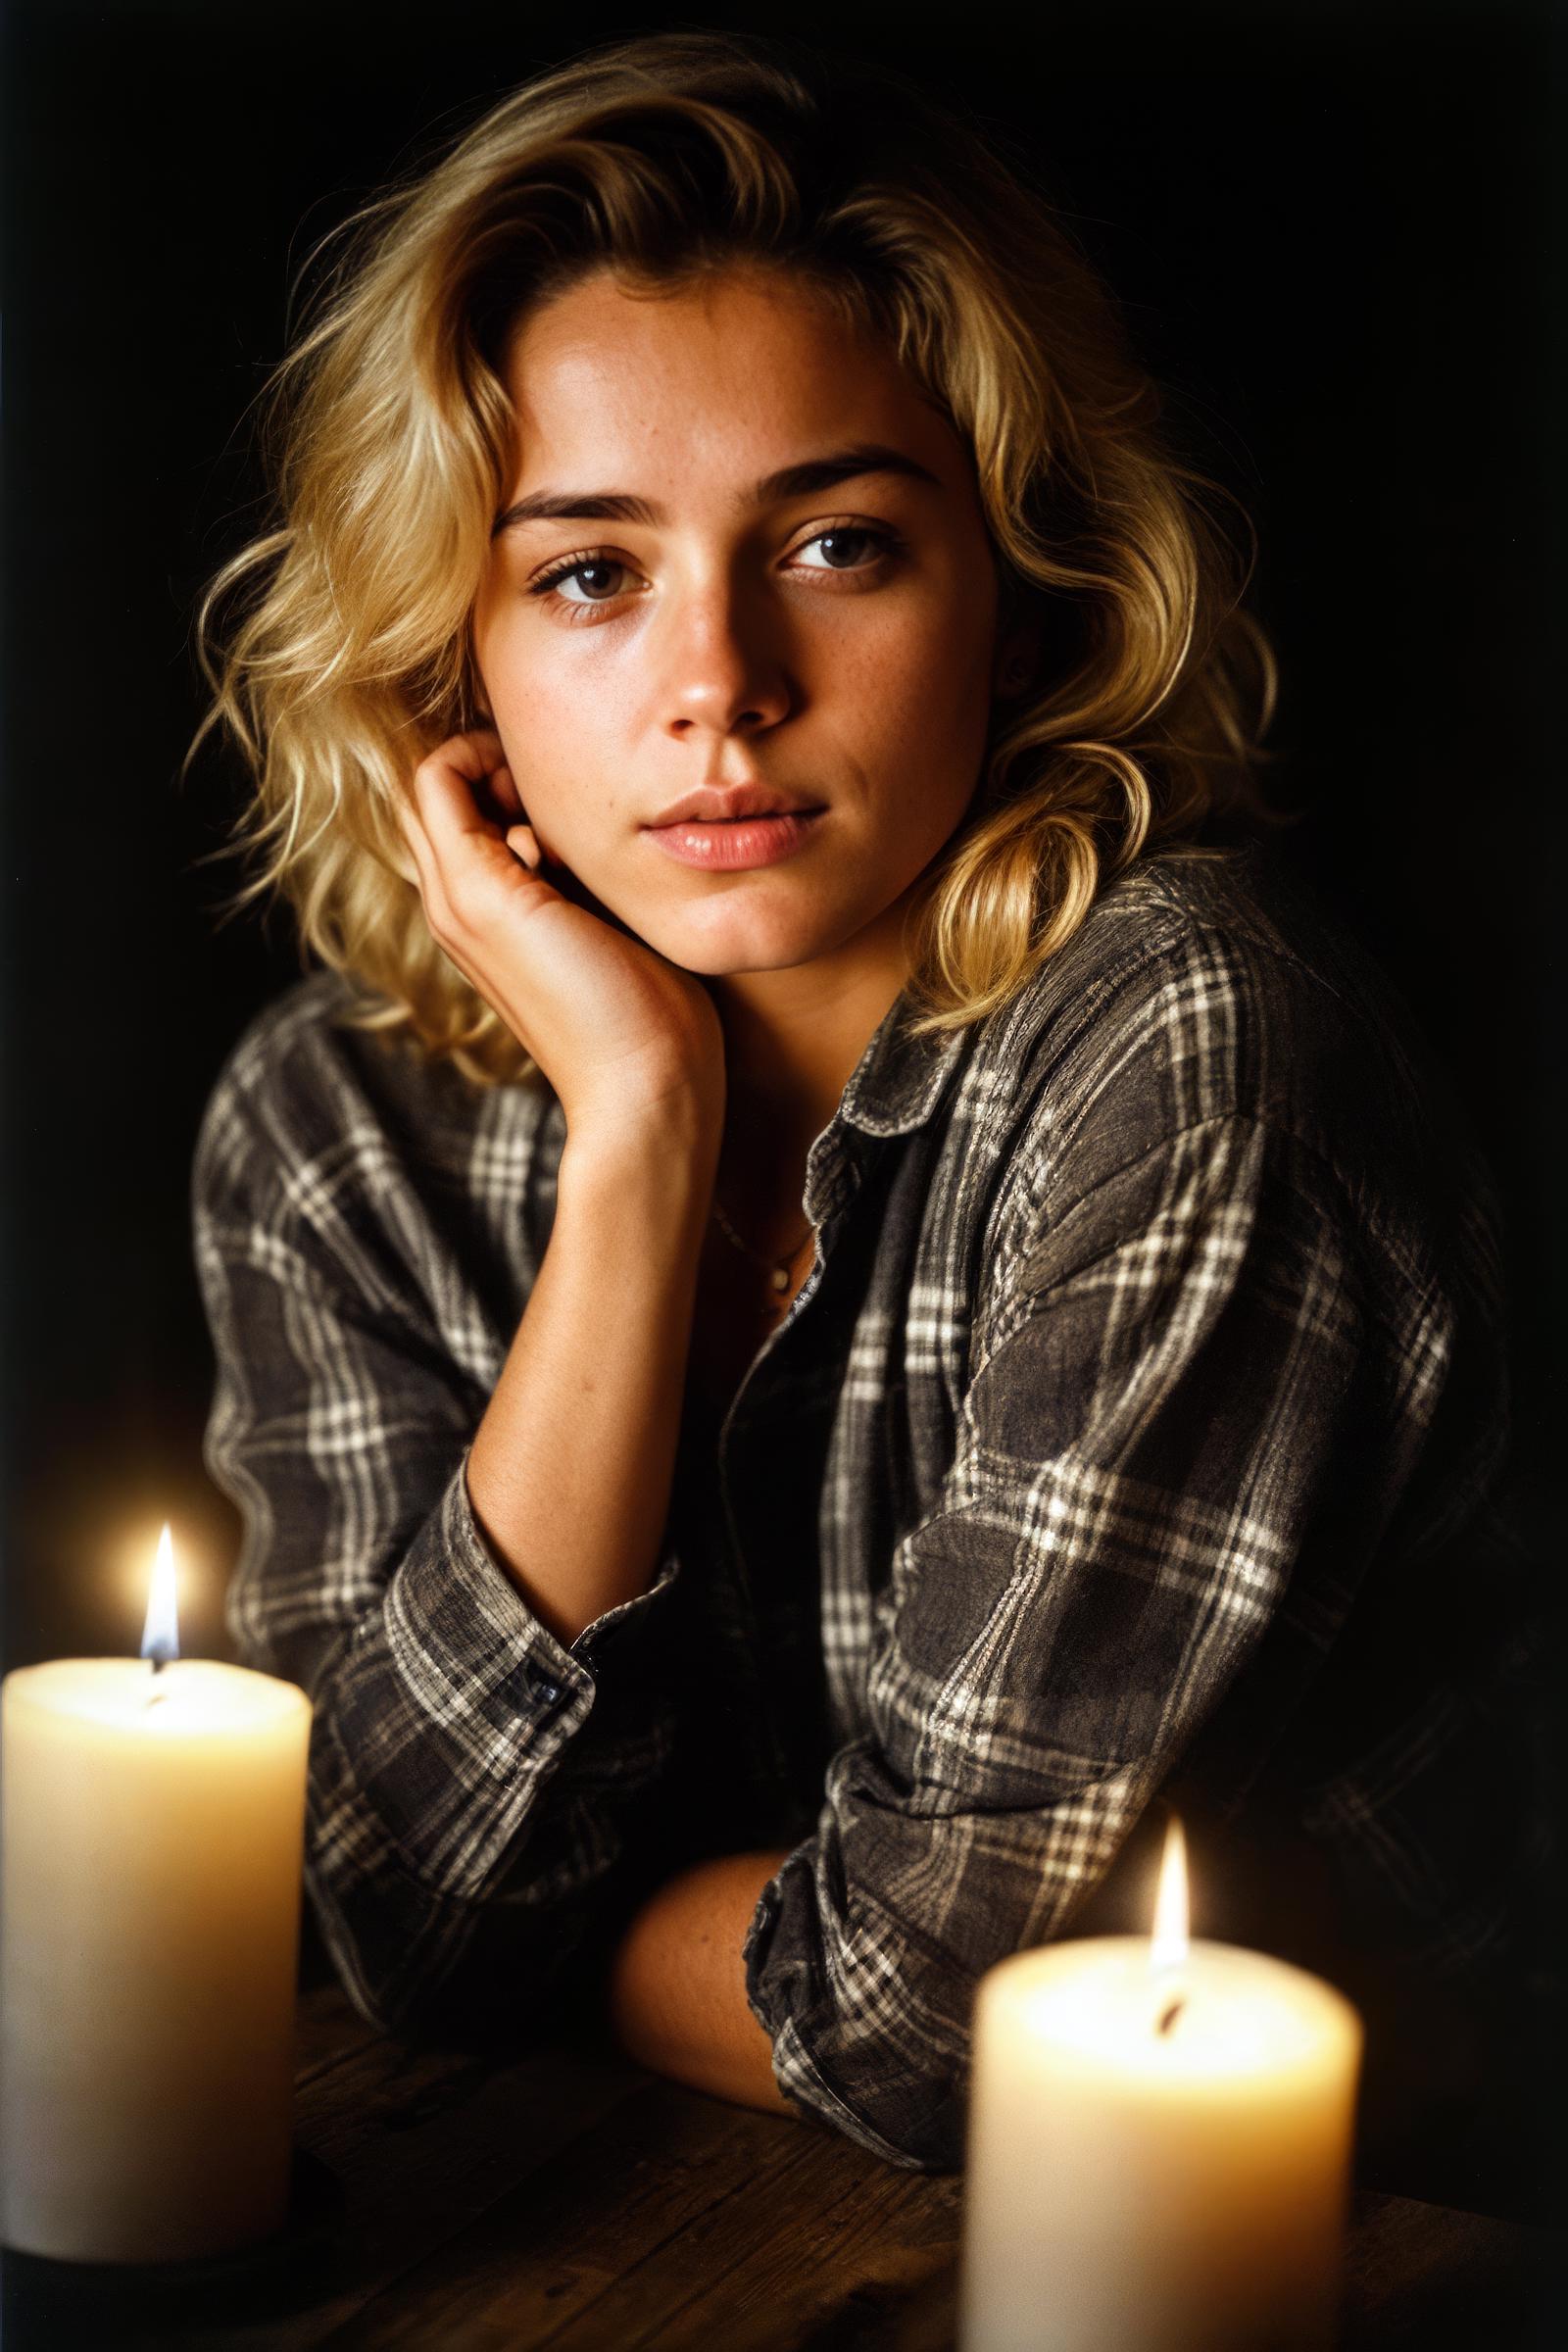 A woman with blonde hair, wearing a plaid shirt, is posing in front of two lit candles.